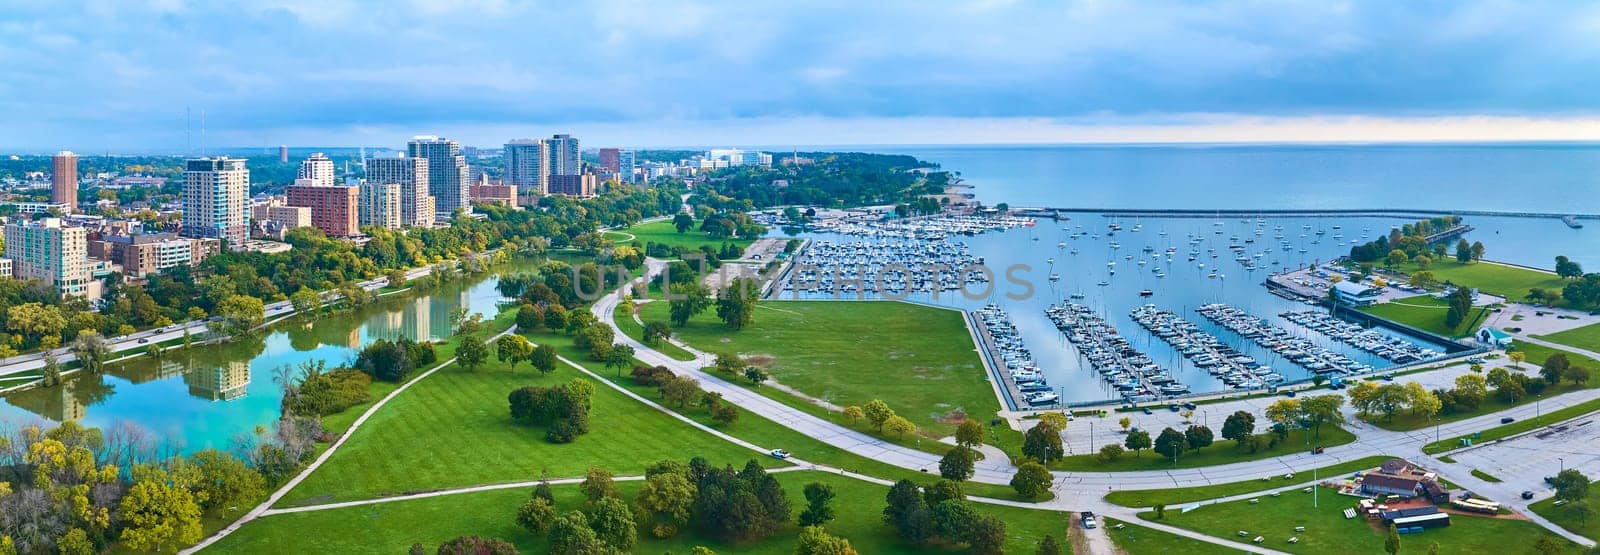 Aerial Milwaukee Marina at Dawn with Urban Skyline and Park Panorama by njproductions